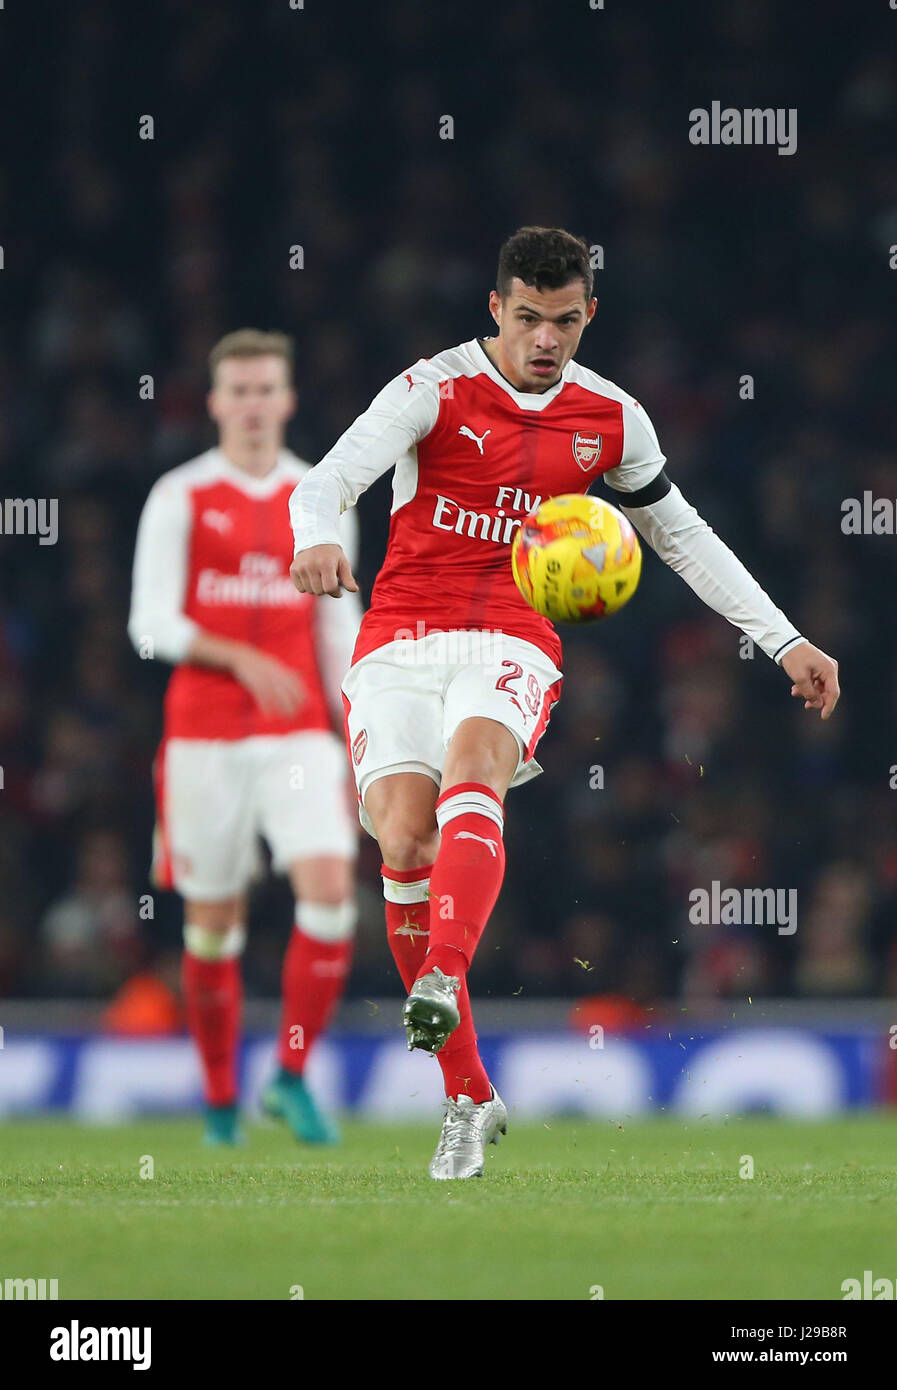 Arsenals Granit Xhaka during the EFL Cup Quater-final match between Arsenal and Southampton at the Emirates Stadium in London. November 30, 2016. EDITORIAL USE ONLY - FA Premier League and Football League images are subject to DataCo Licence see www.football-dataco.com Stock Photo